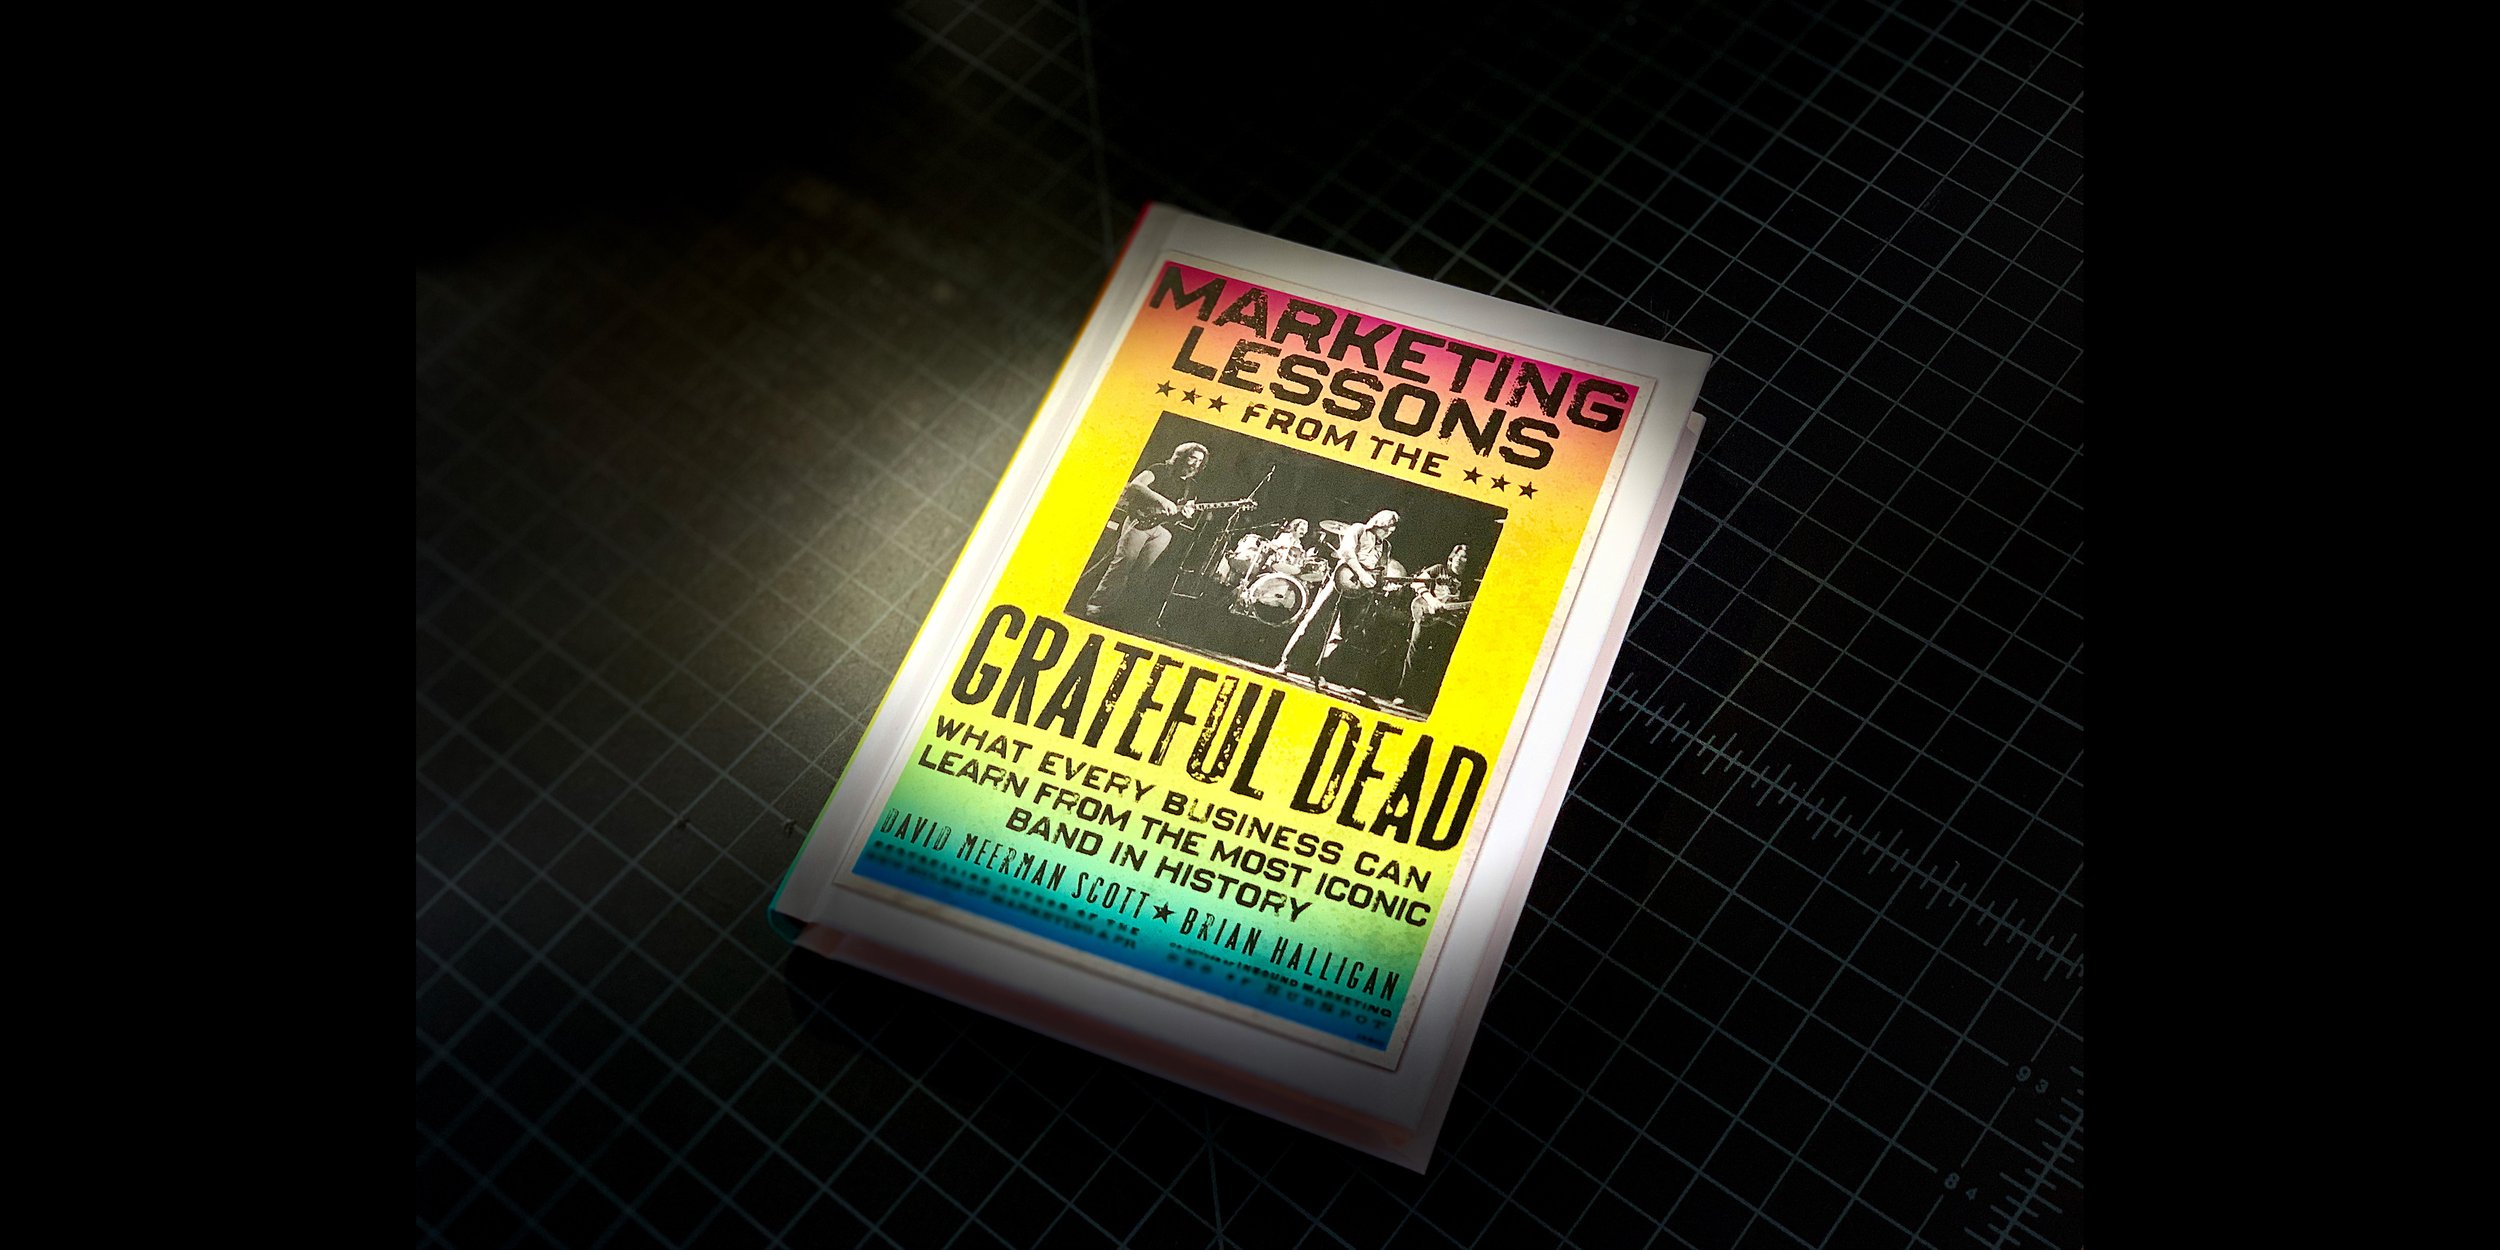 Marketing Lessons from the Grateful Dead: What Every Business Can Learn from the Most Iconic Band in History by David Meerman Scott 